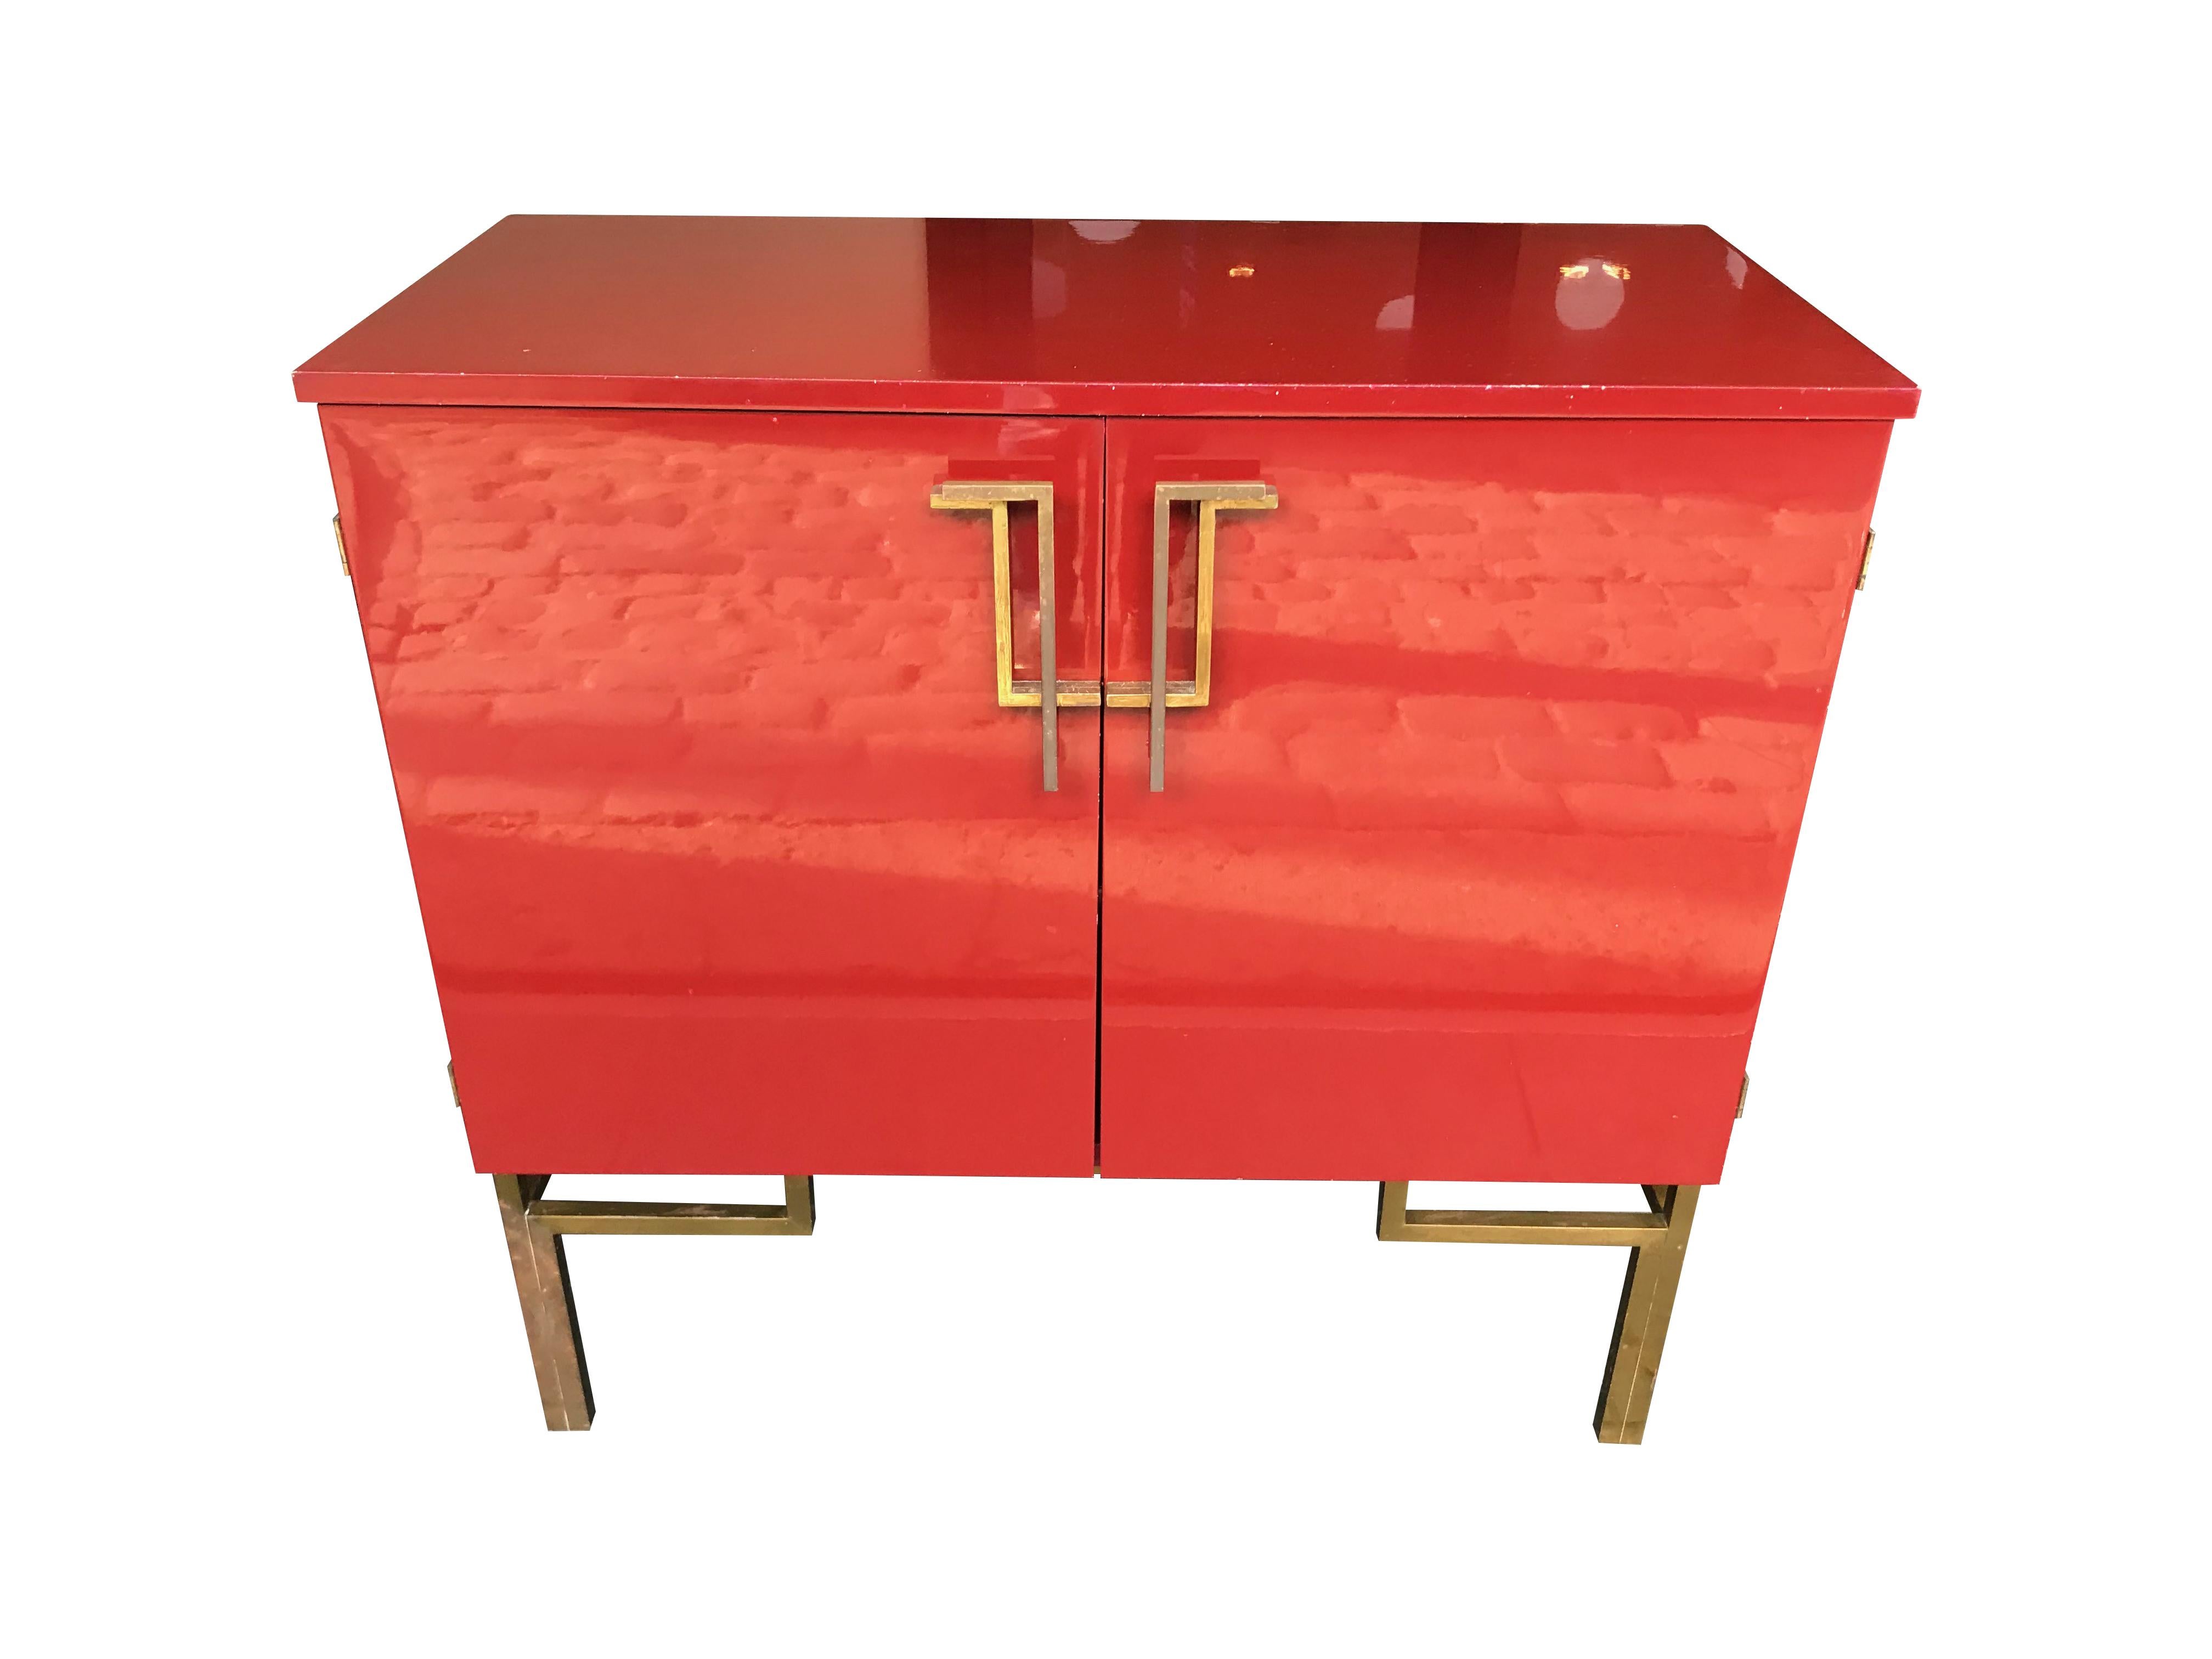 A red lacquered 1970s bar cabinet with brass chinoiserie detailing. The top opens to reveal a recessed mirrored serving area. Two doors on the front have geometric brass handles that open to reveal shelves for glasses and bottles with mirror base